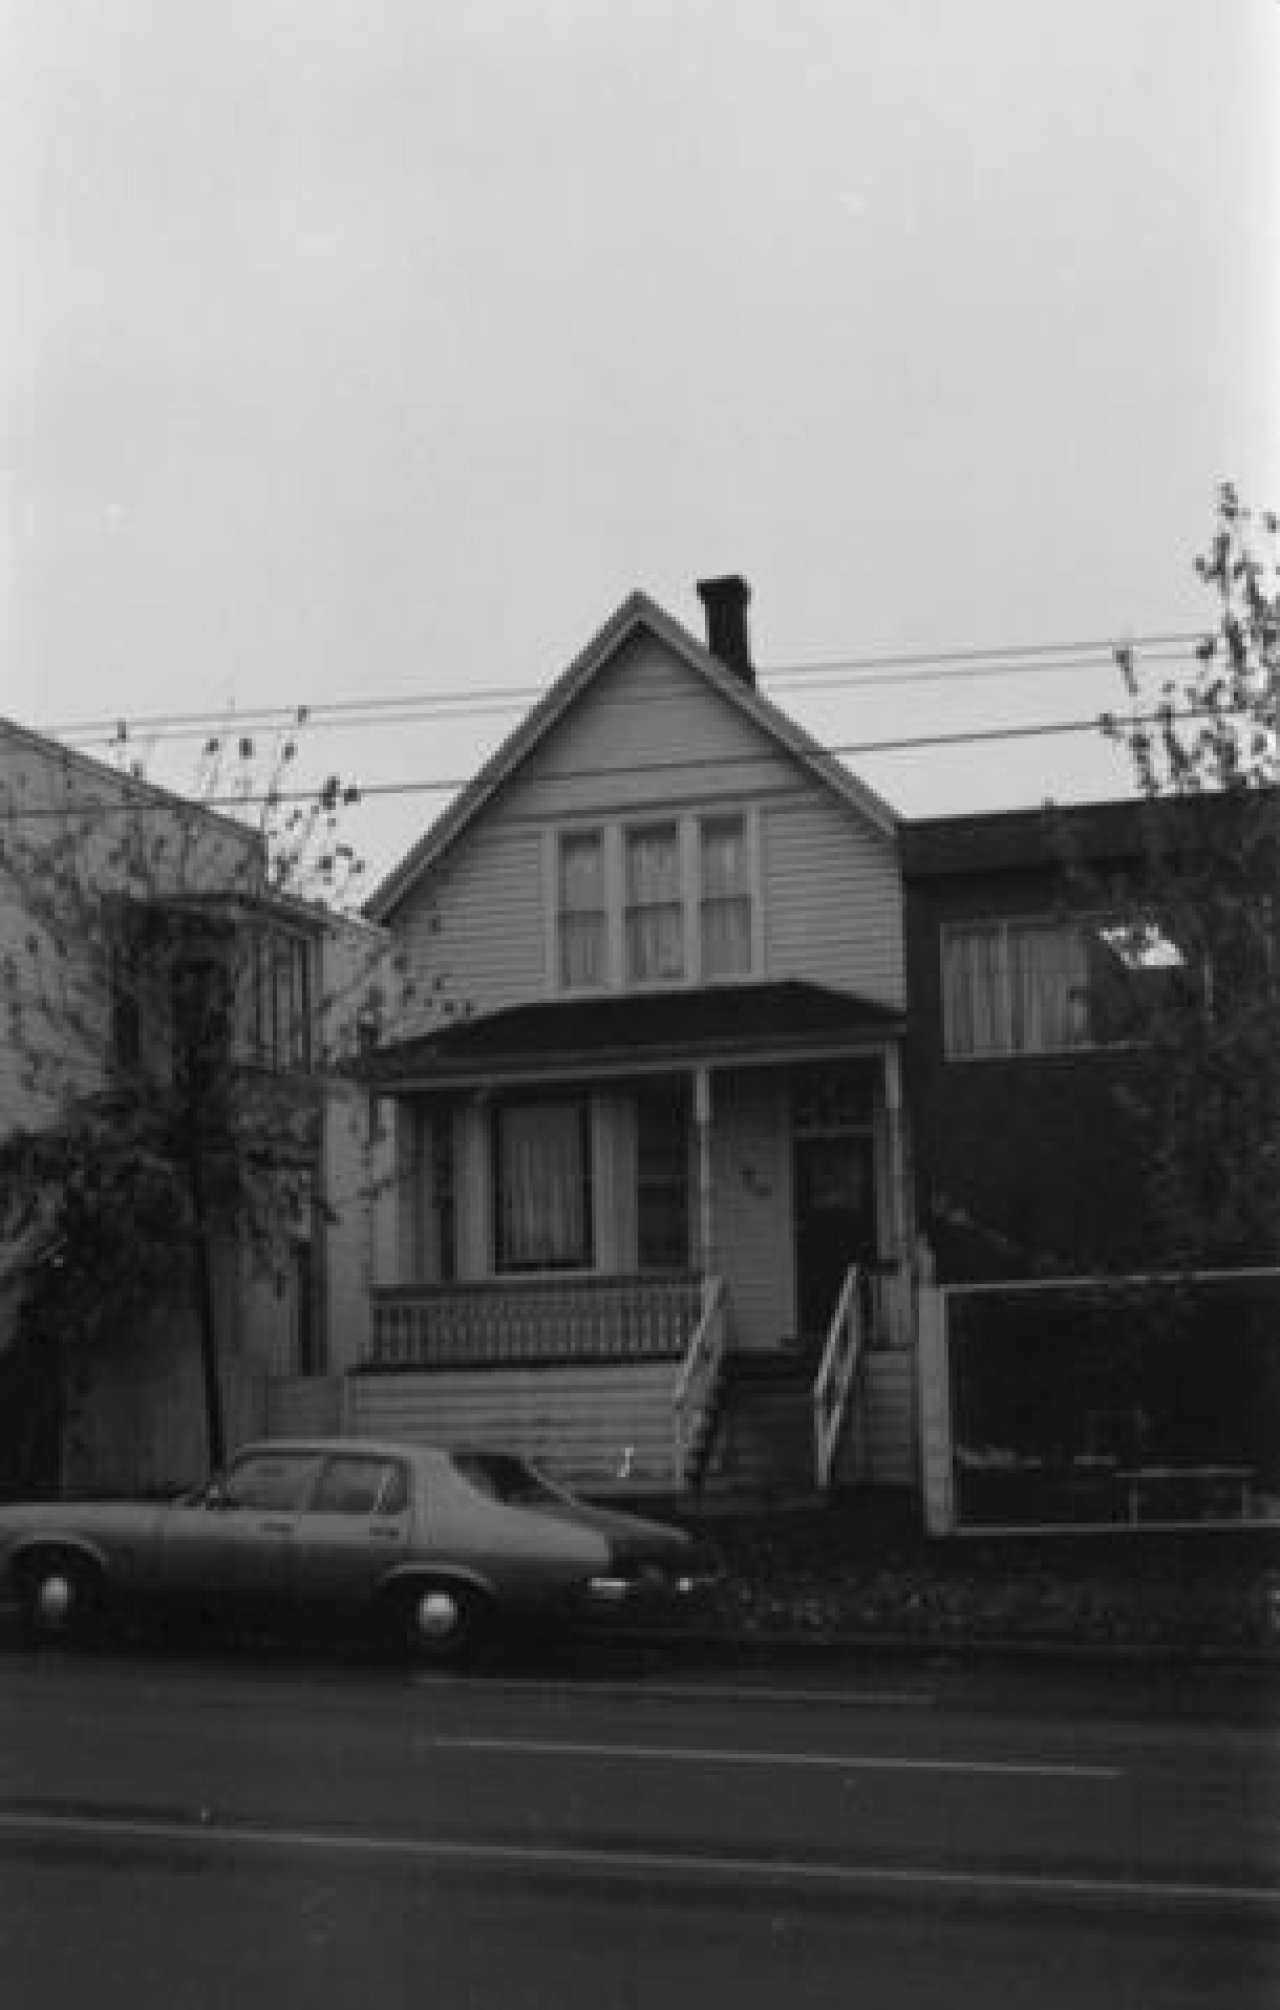 574 E Broadway in 1985. Source: City of Vancouver Archives CVA 791 0013